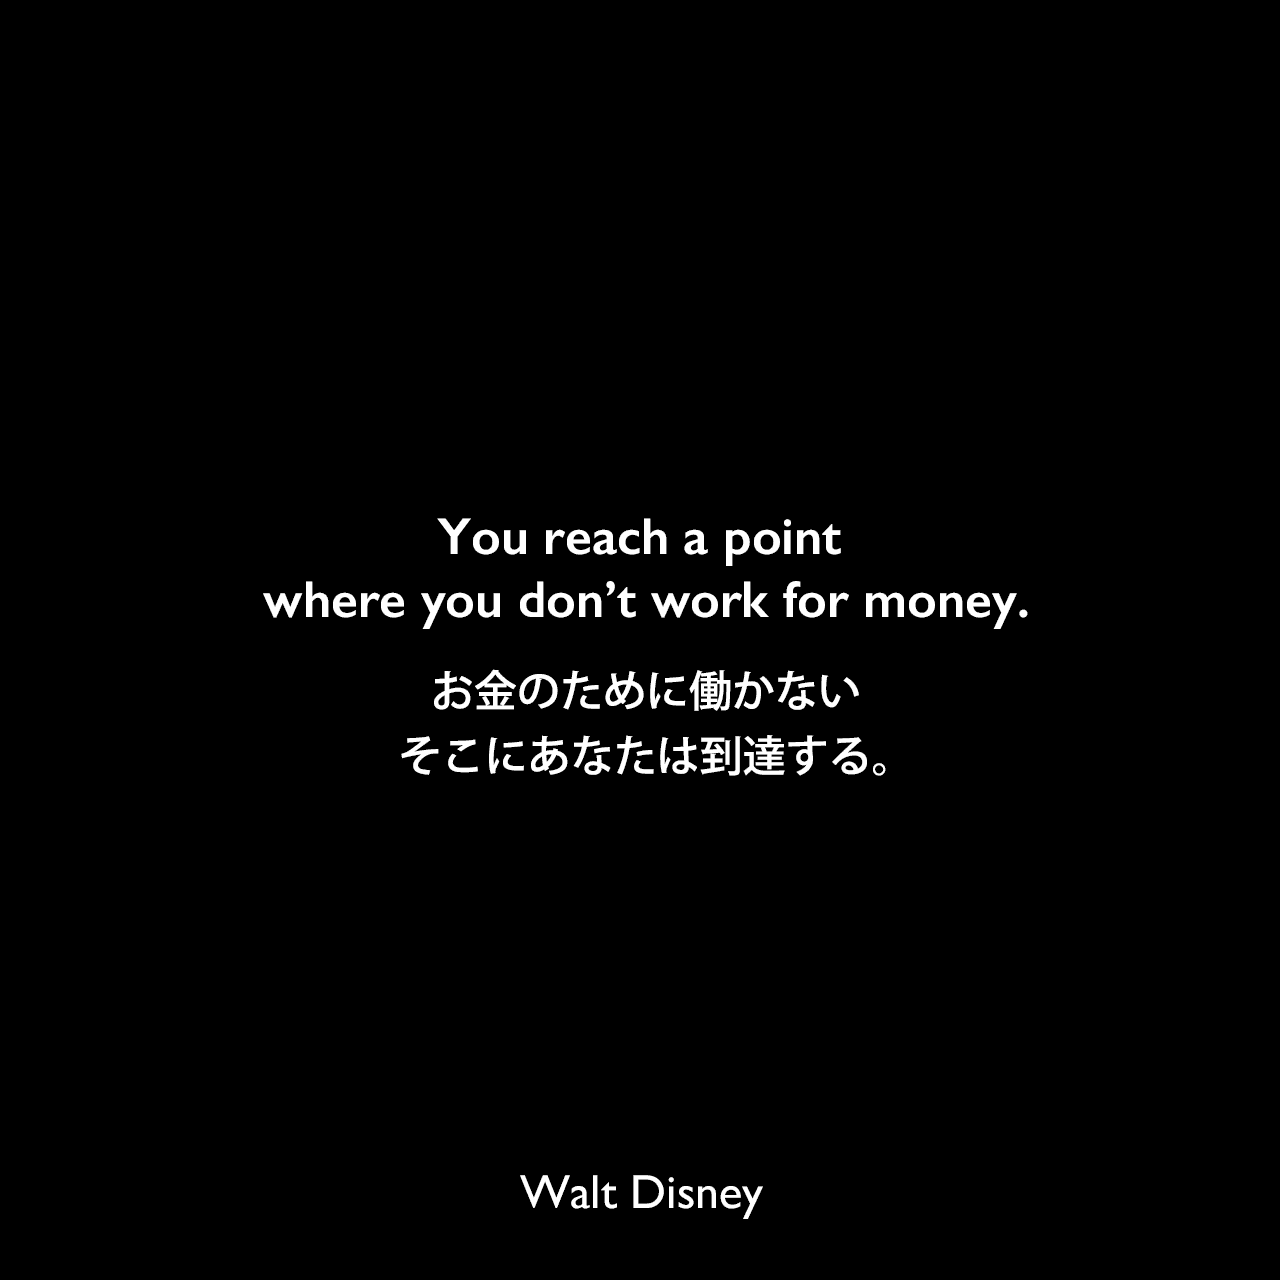 You reach a point where you don’t work for money.お金のために働かない、そこにあなたは到達する。Walt Disney